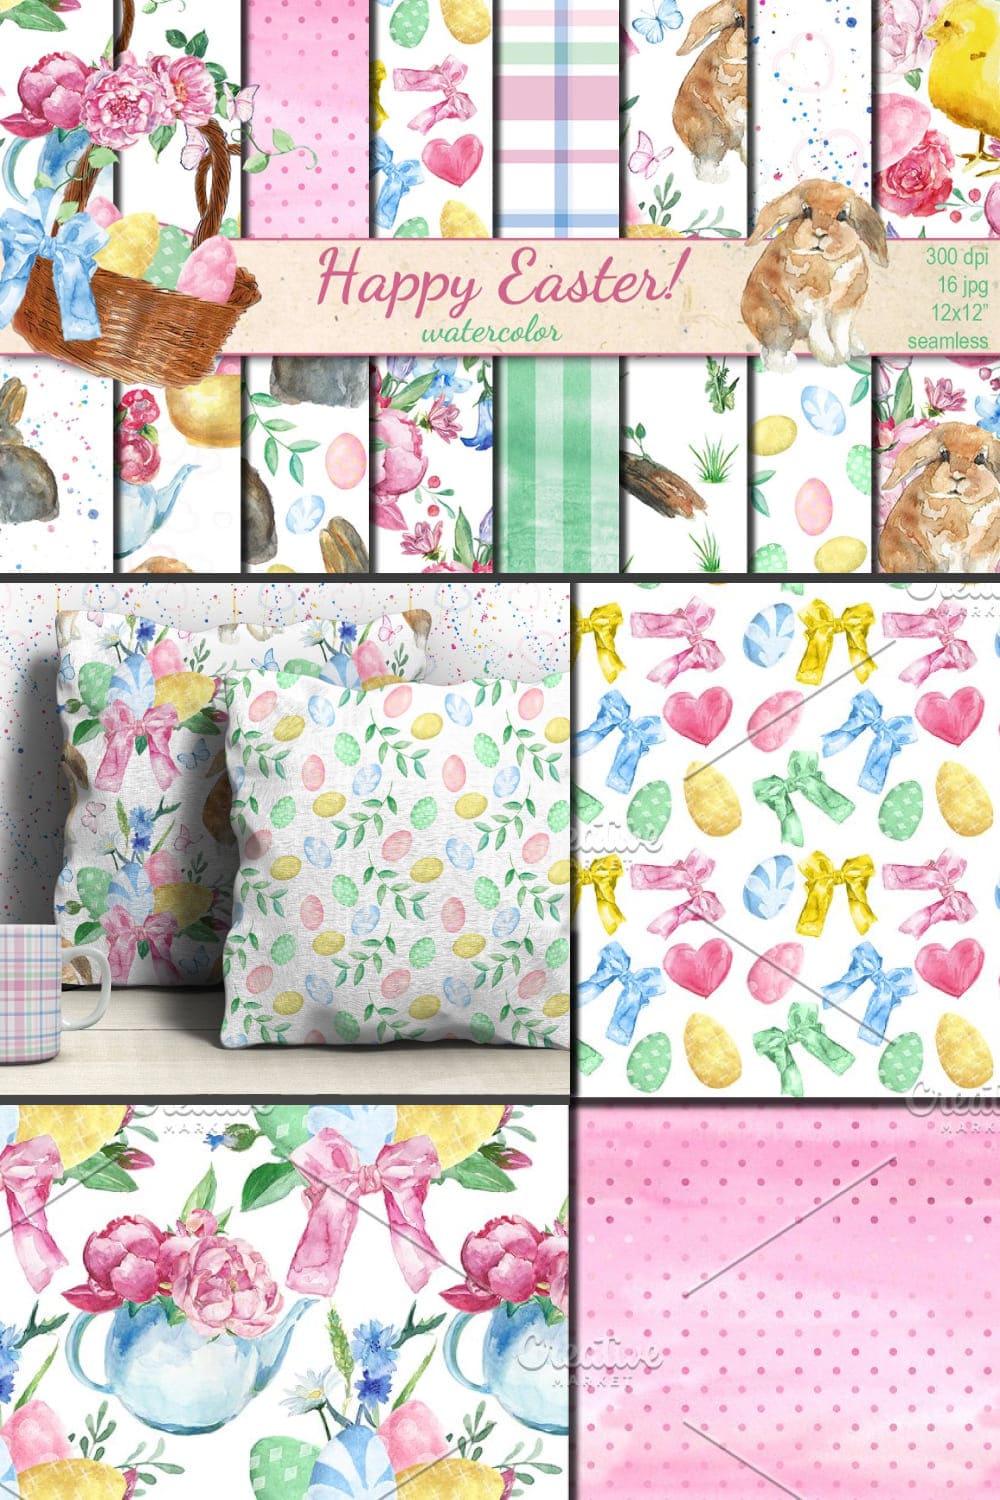 Collage with Easter drawings in decor and original.